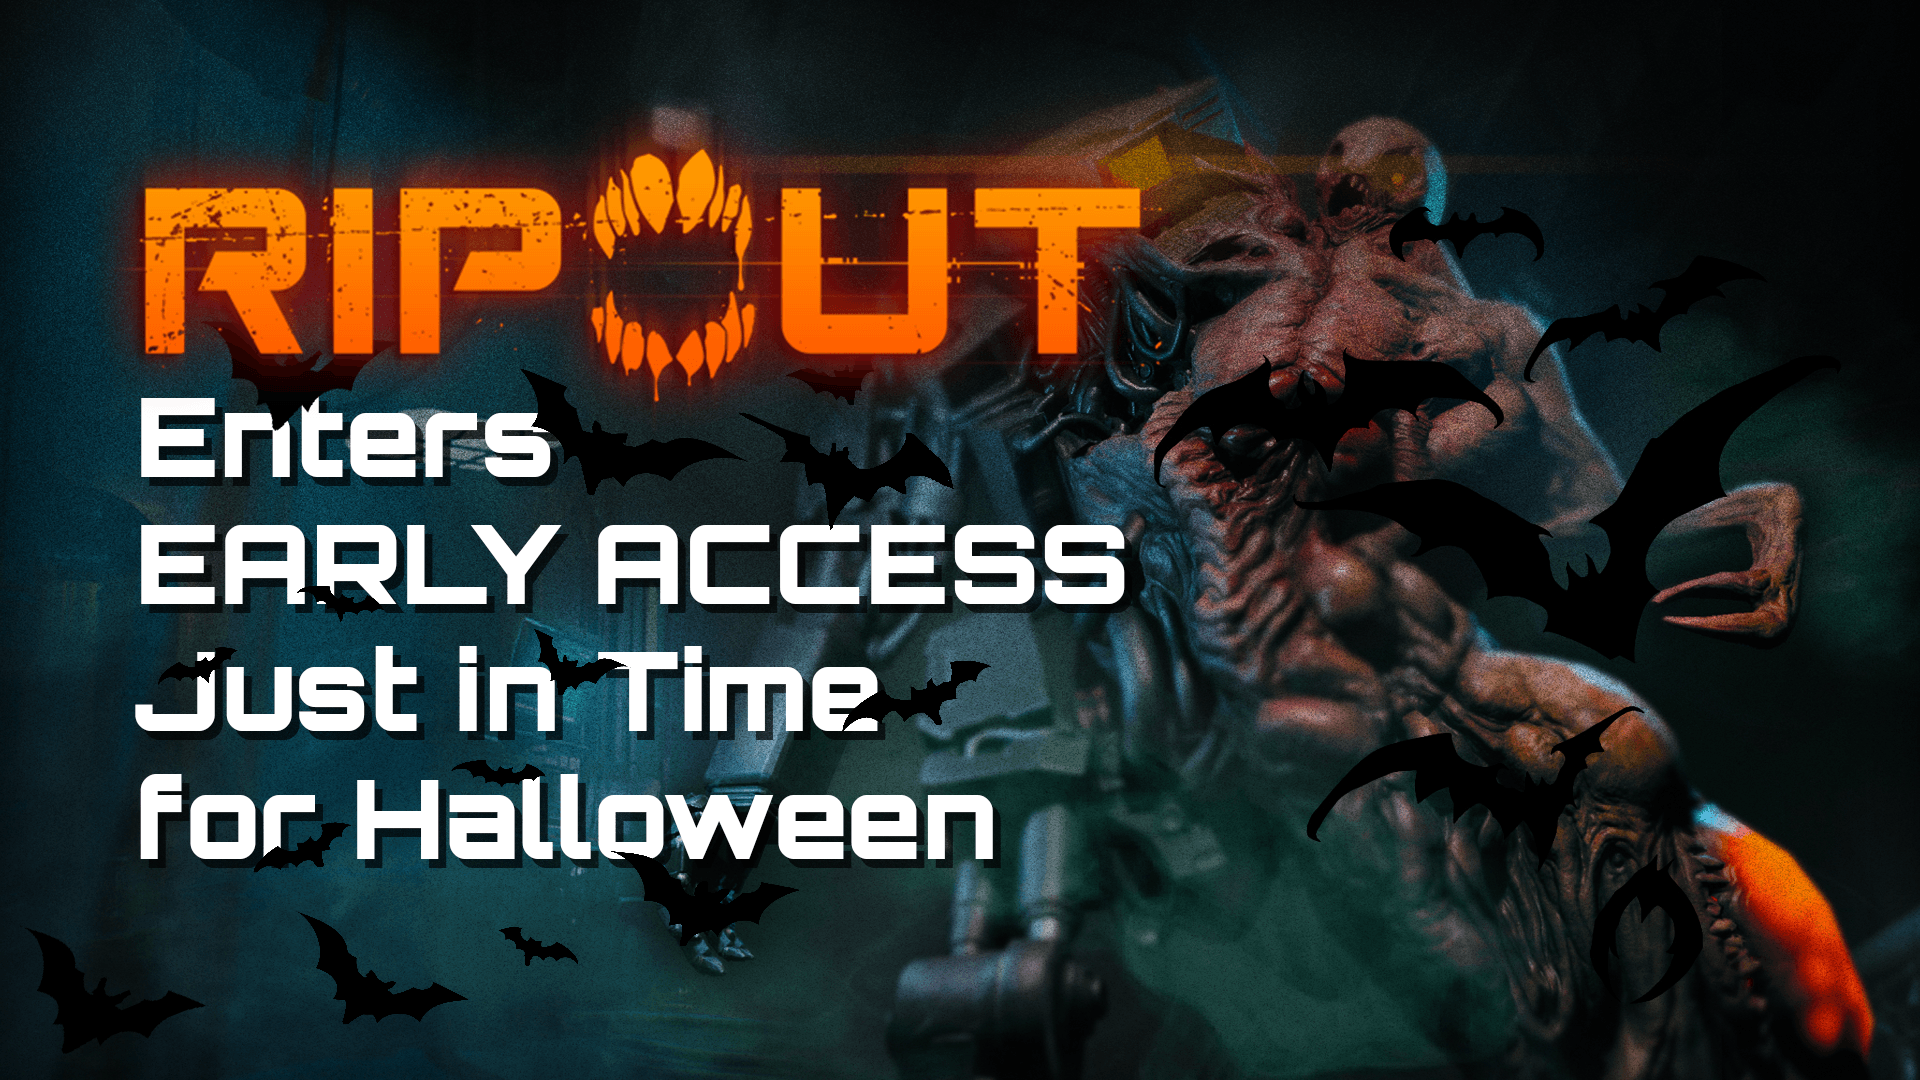 ripout enters early access in time for halloween